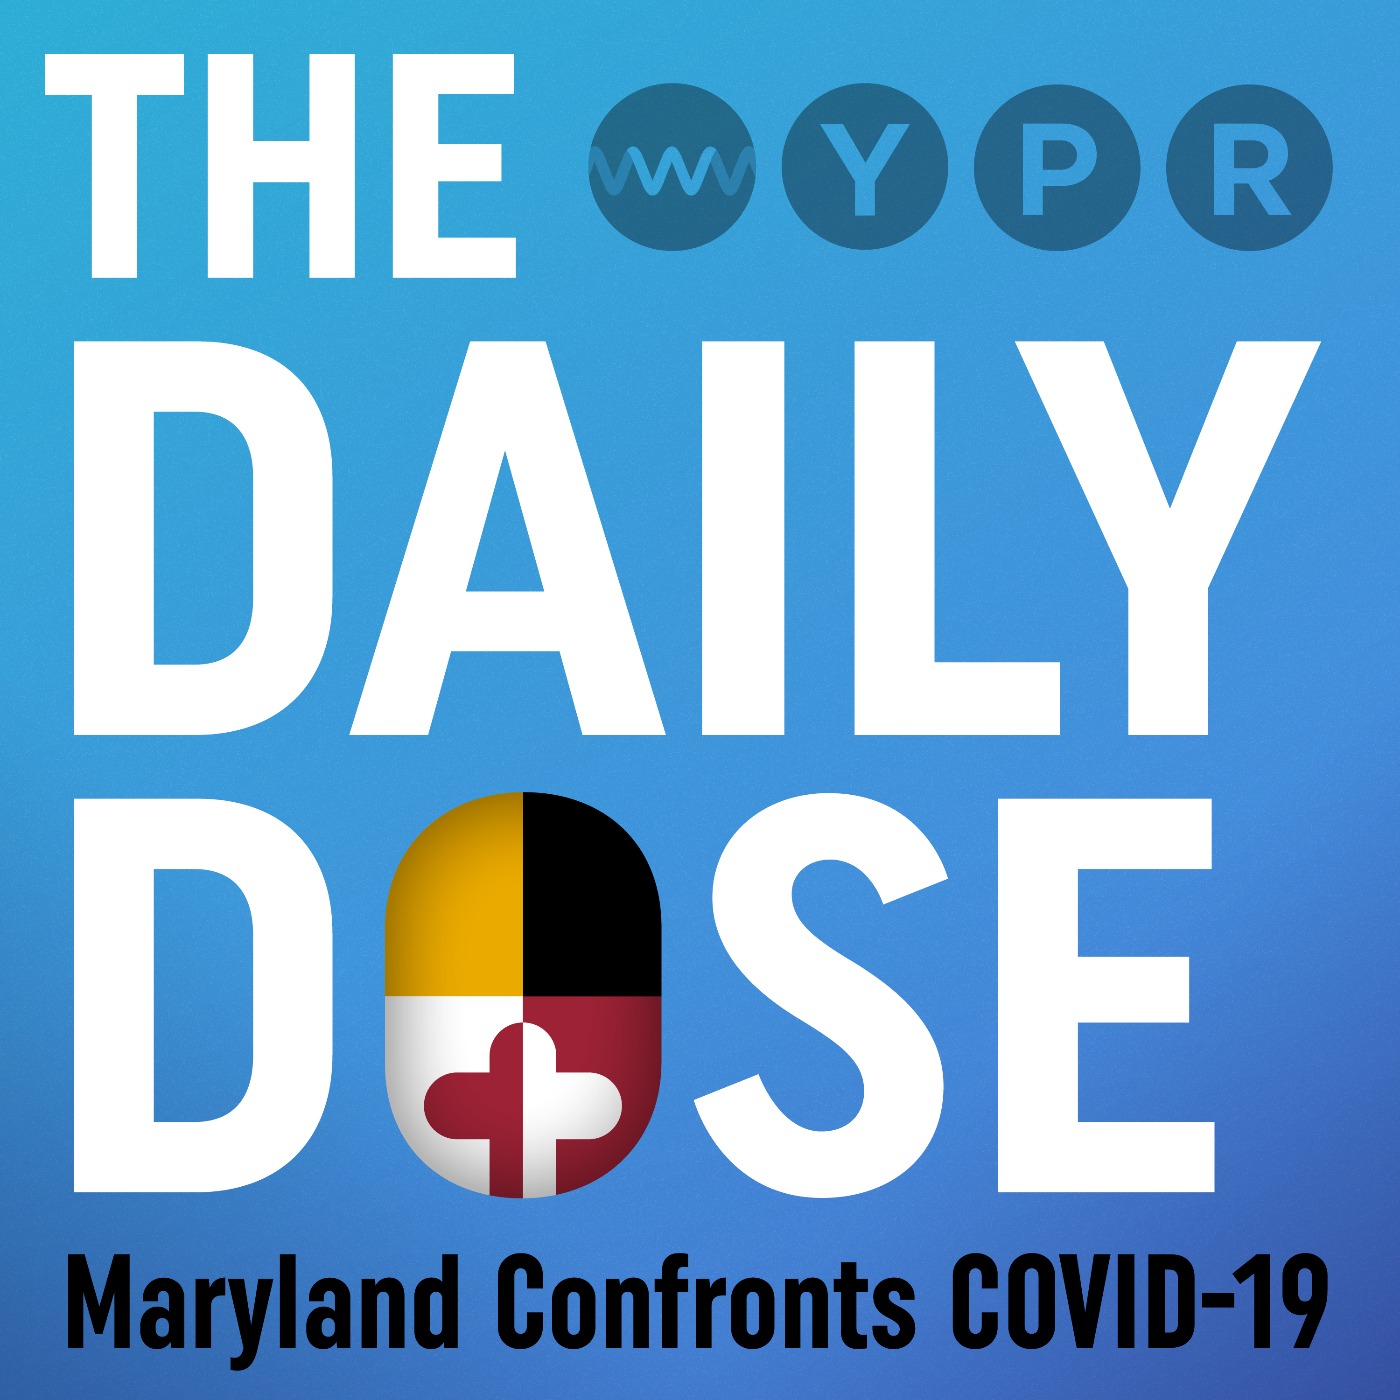 More than 1,000 Marylanders hospitalized for COVID-19